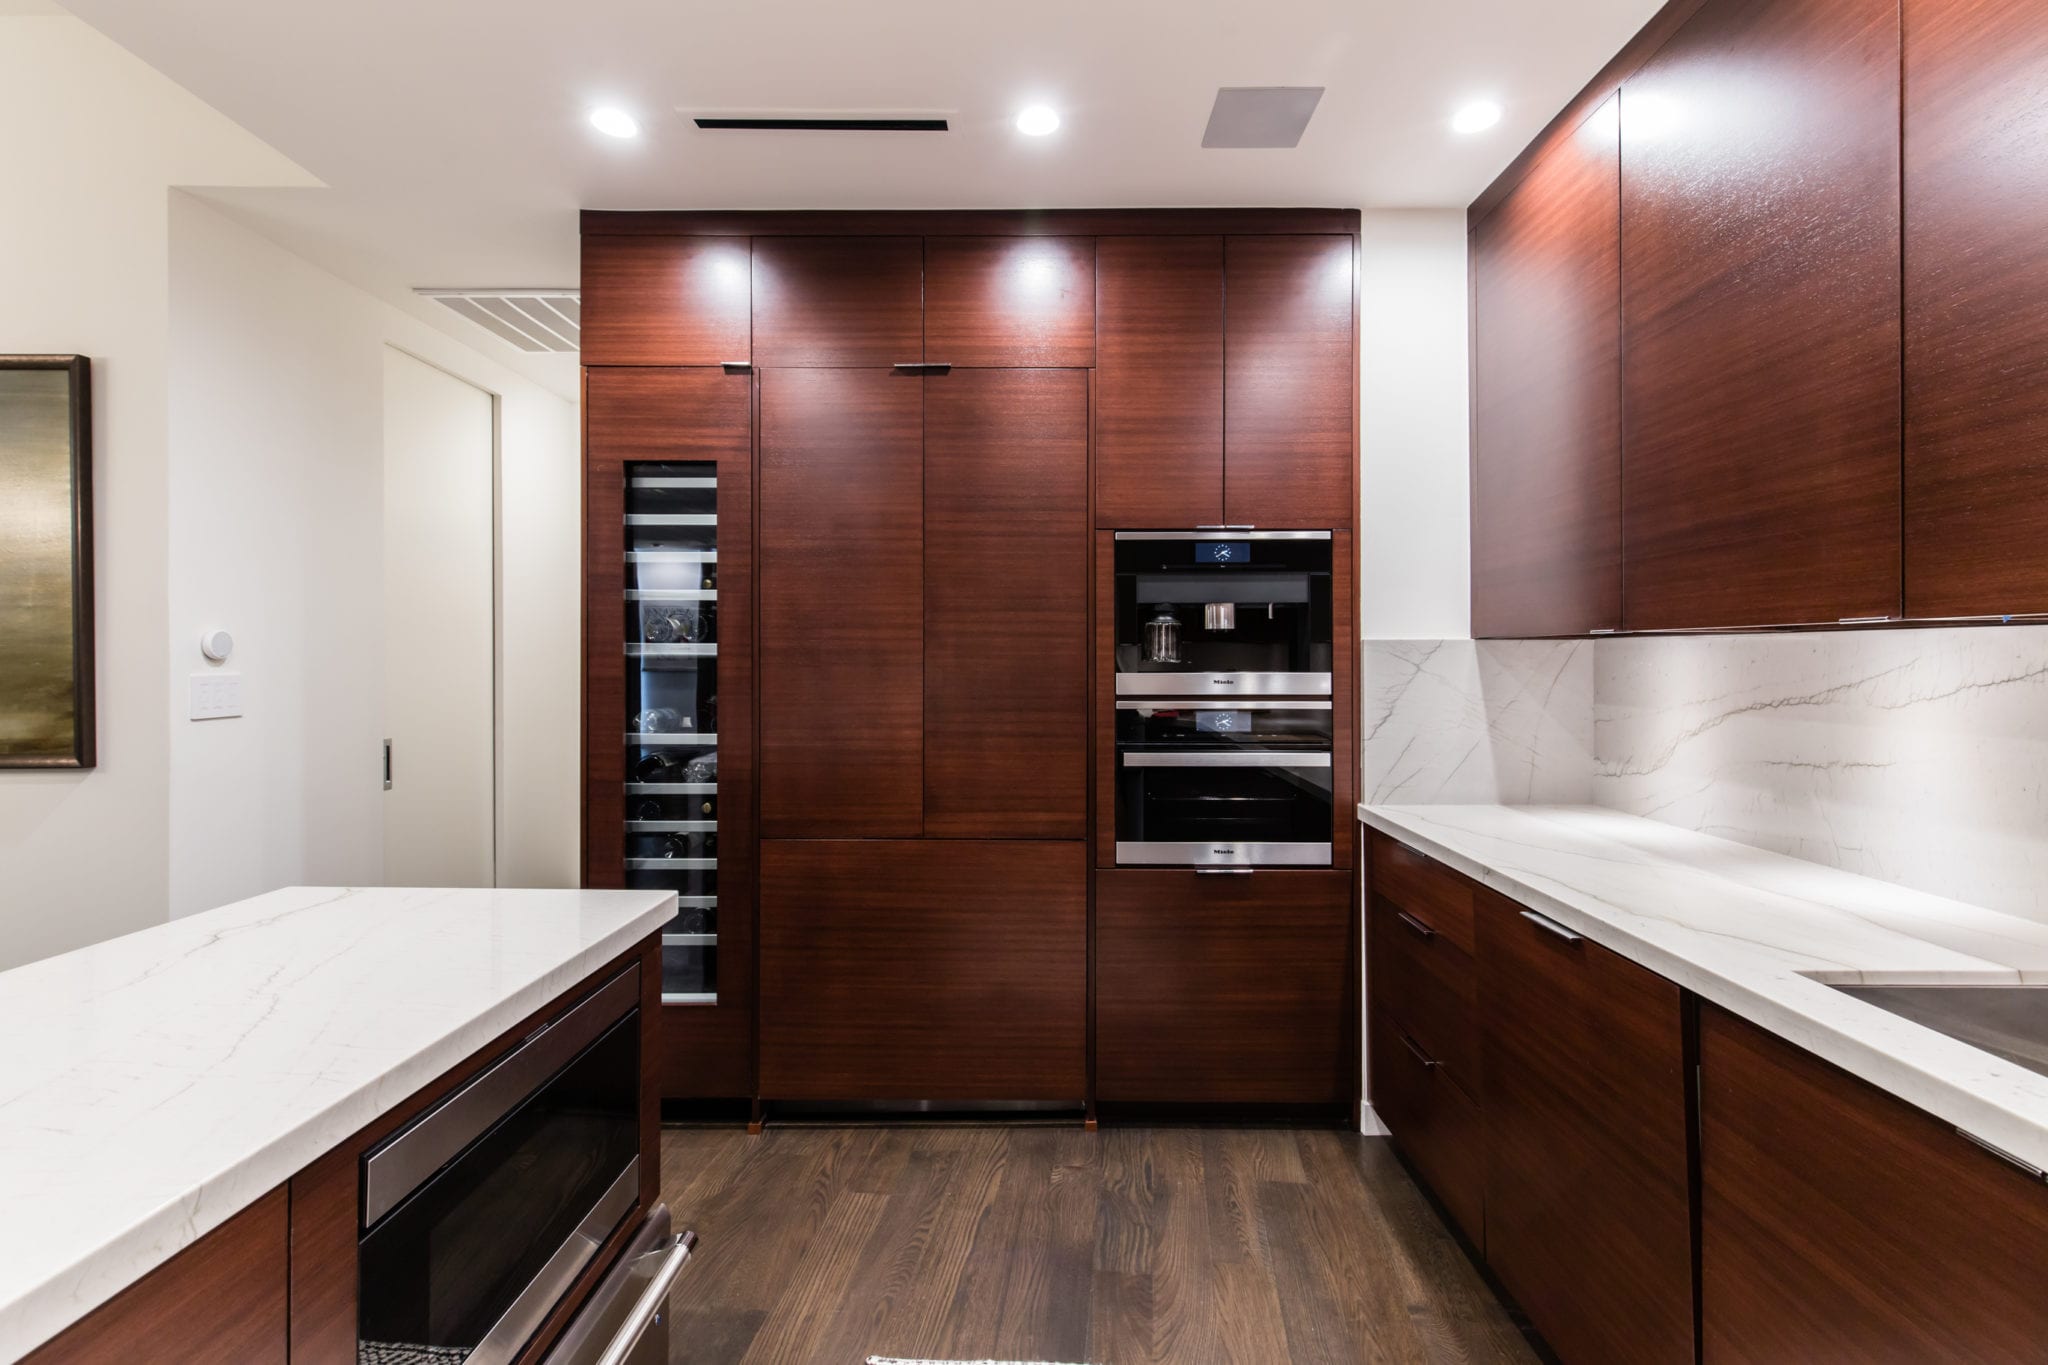 Kitchen-2-story-high-rise-condo-remodel-The-Travis-Katy-Trail-Kitchen-Cabinets-with-panel-ready-refrigerator